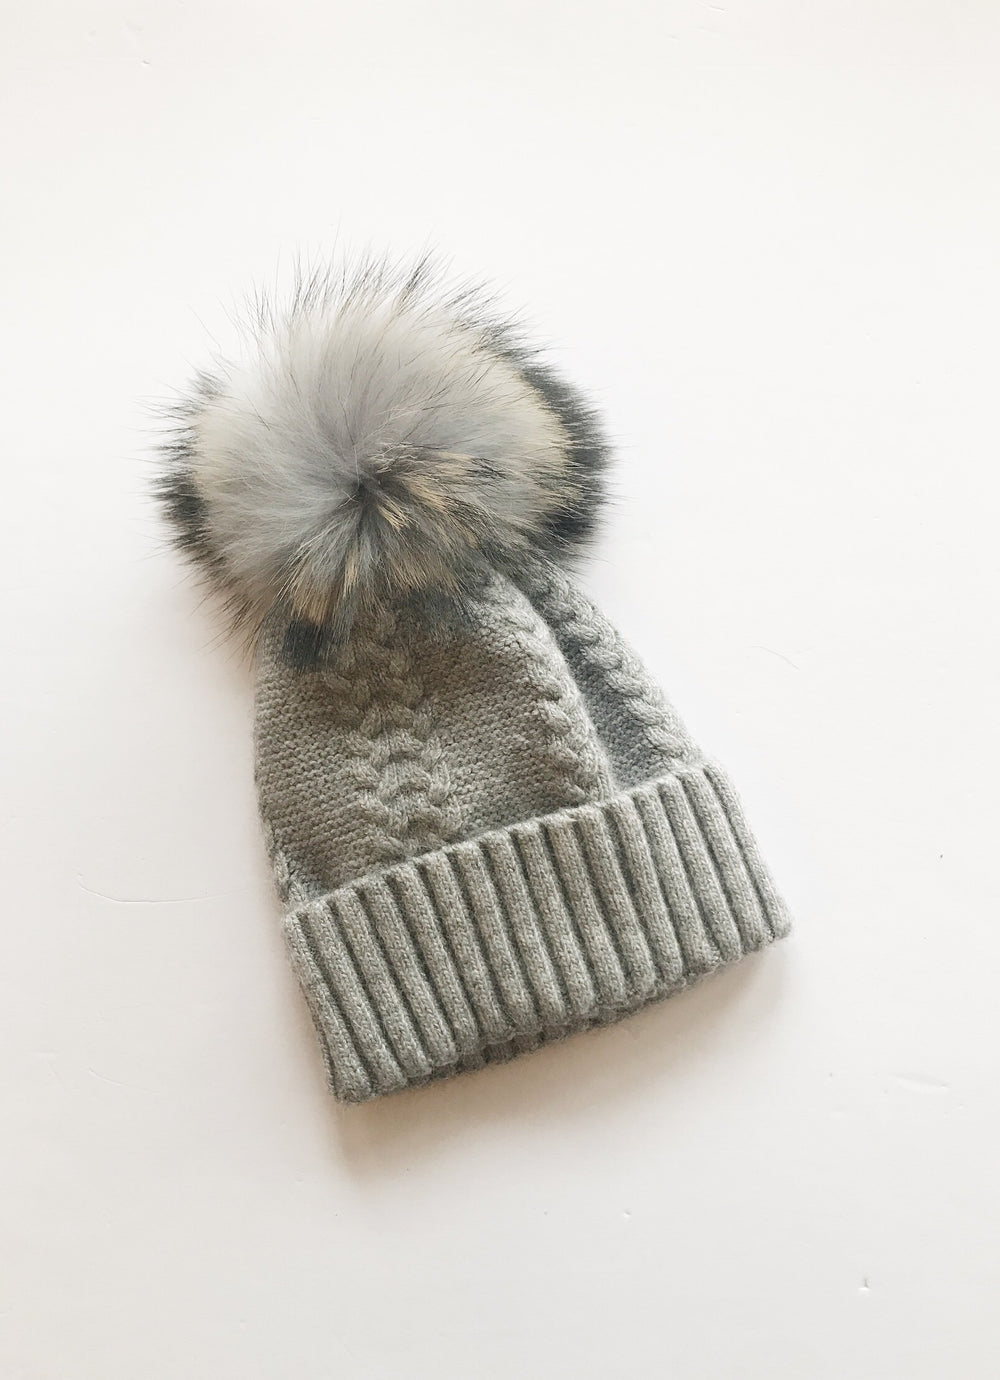 Equation Olivia Hat in Gray w/ Gray pom / EQUATION Boutique